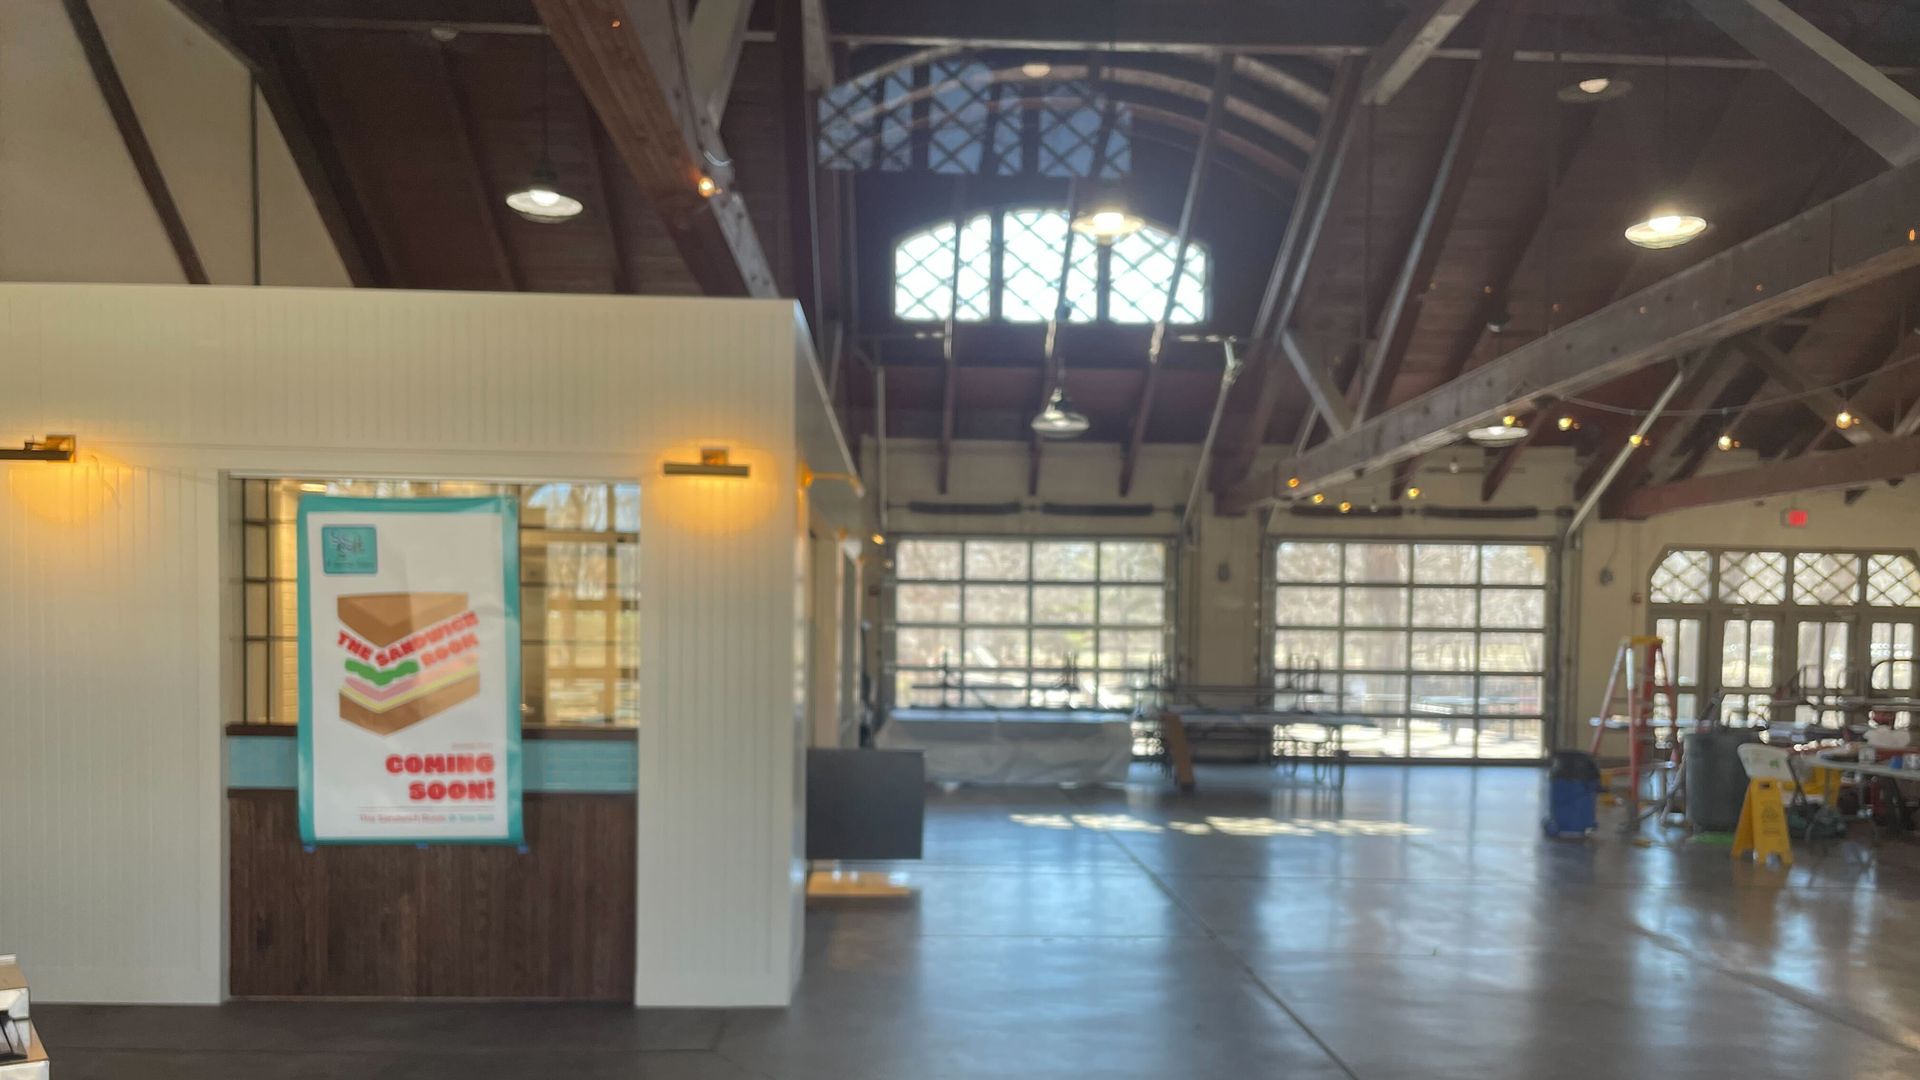 a view inside a pavilion with a white sandwich shop with a sign that says opening soon